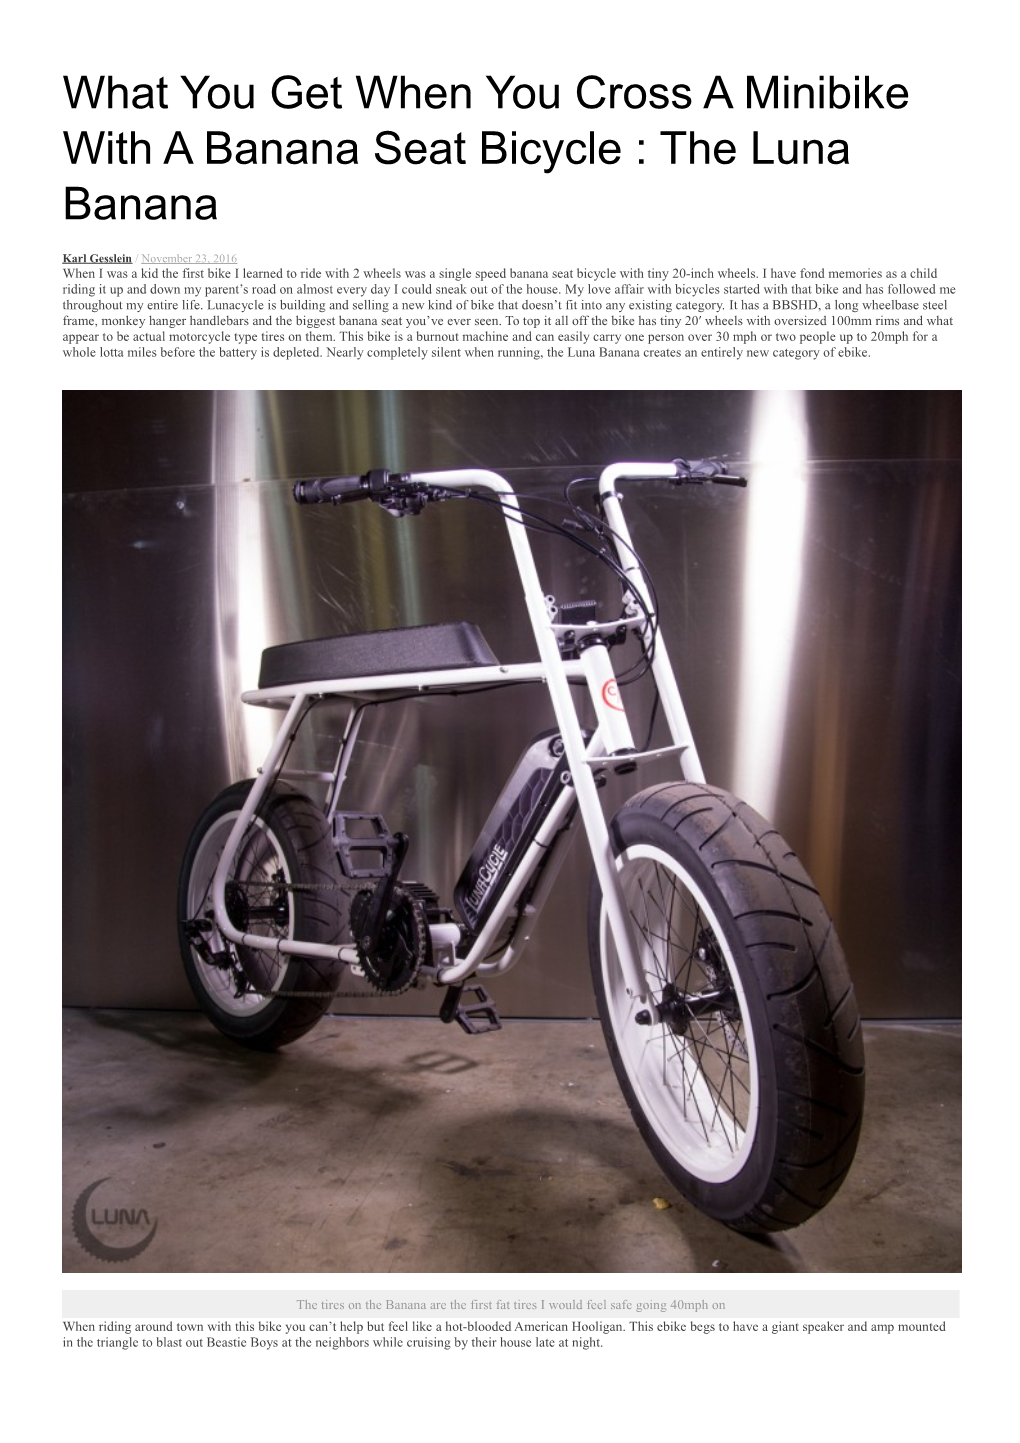 What You Get When You Cross a Minibike with a Banana Seat Bicycle : the Luna Banana